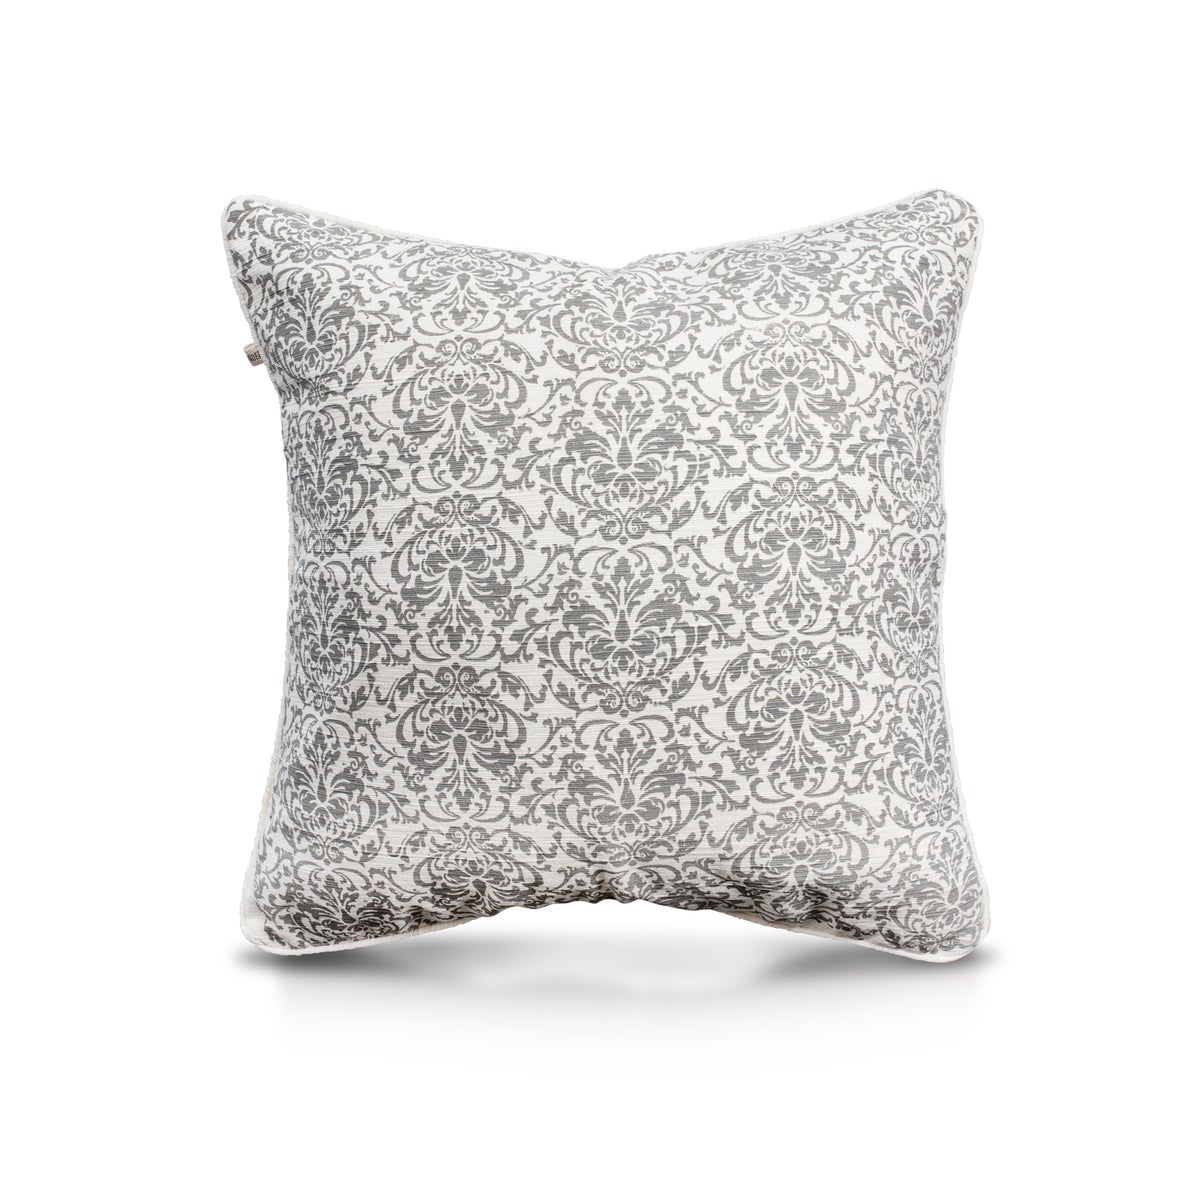 Pillow, 24" with Piping - Damask, Cool Gray